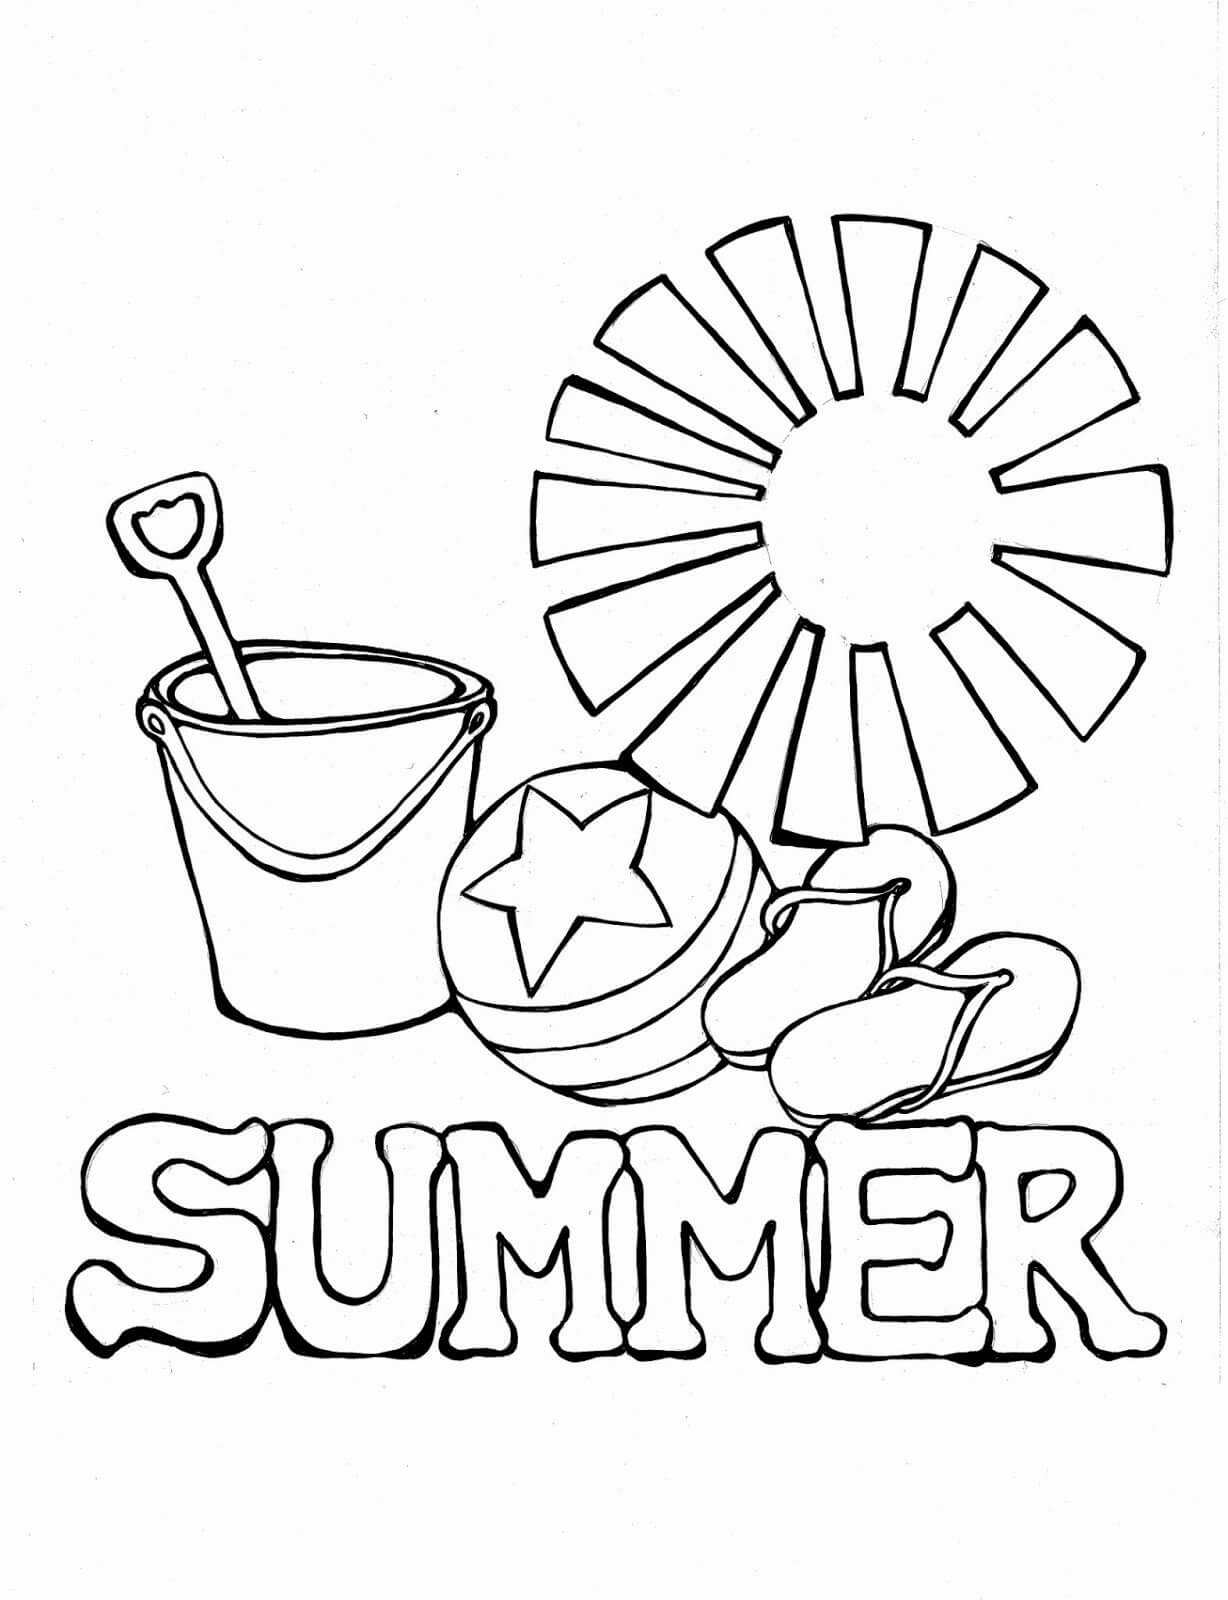 Summer 1 Coloring Page